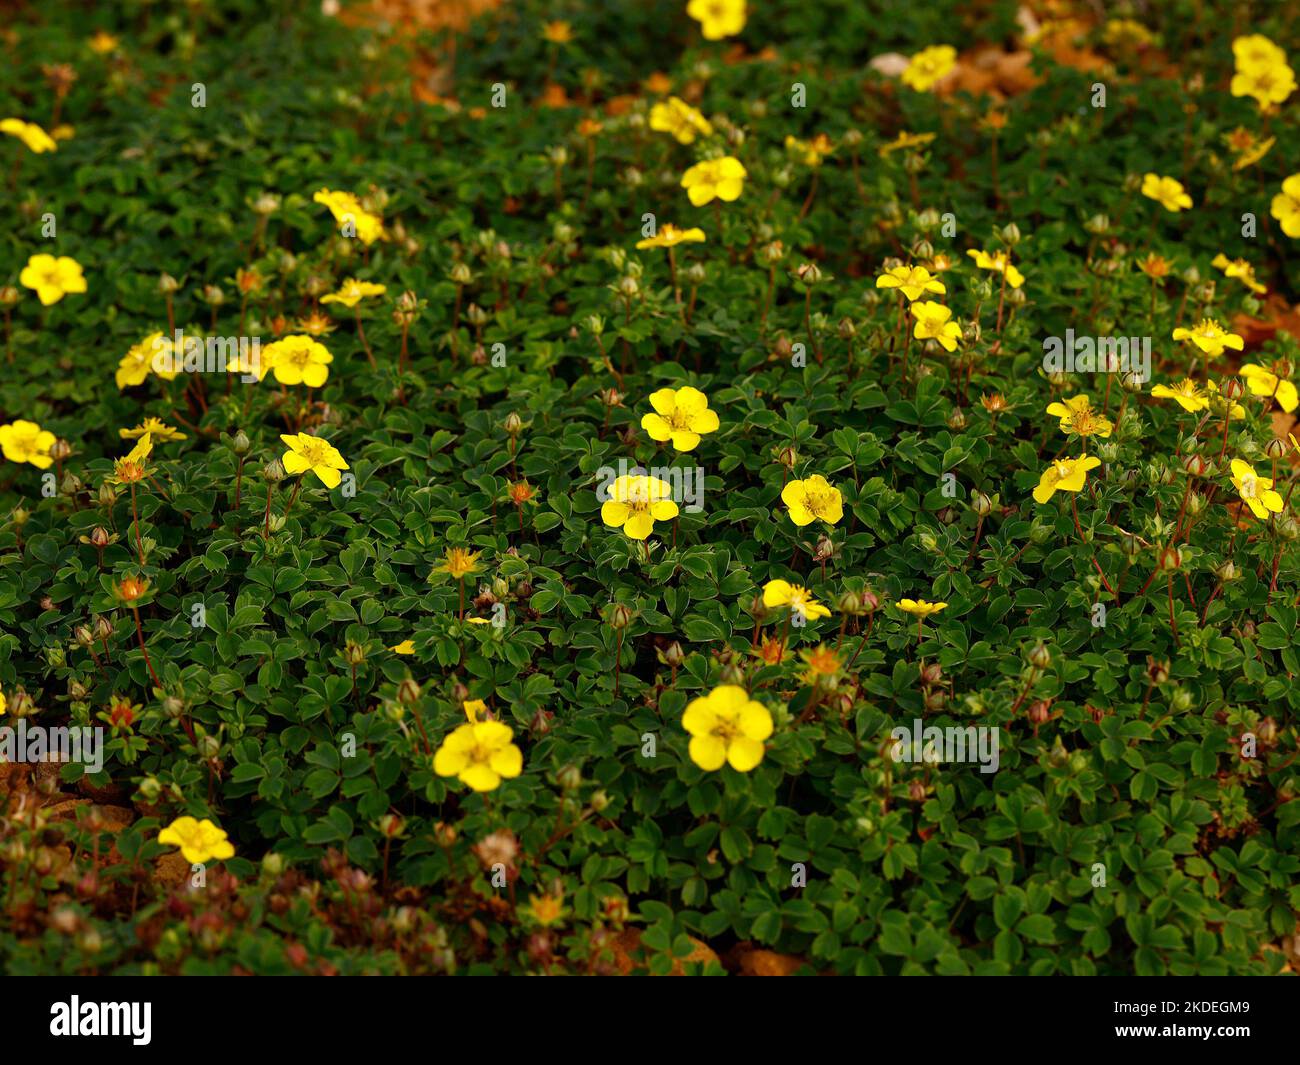 Close up of the yellow flowers and green leaves of the deciduous herbaceous perennial low growing garden plant Potentilla eriocarpa. Stock Photo